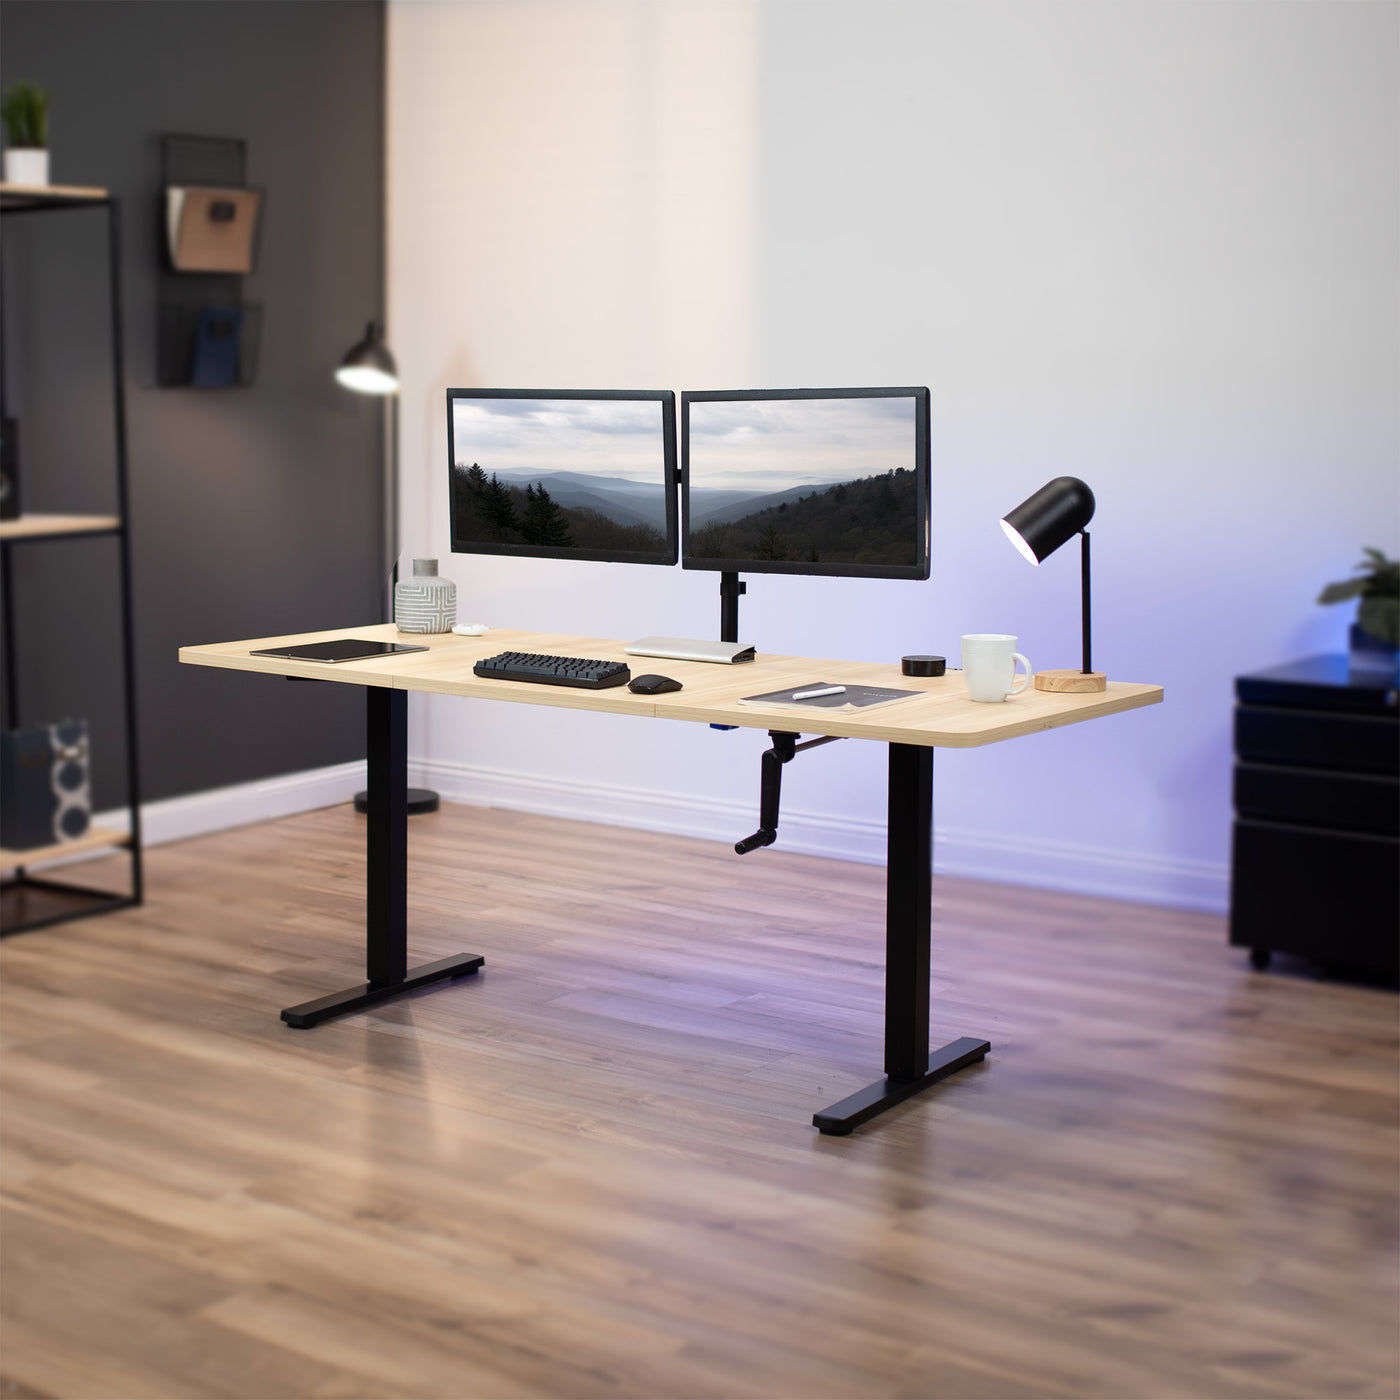 Wide surface sturdy sit or stand active workstation with adjustable height using manual hand crank.